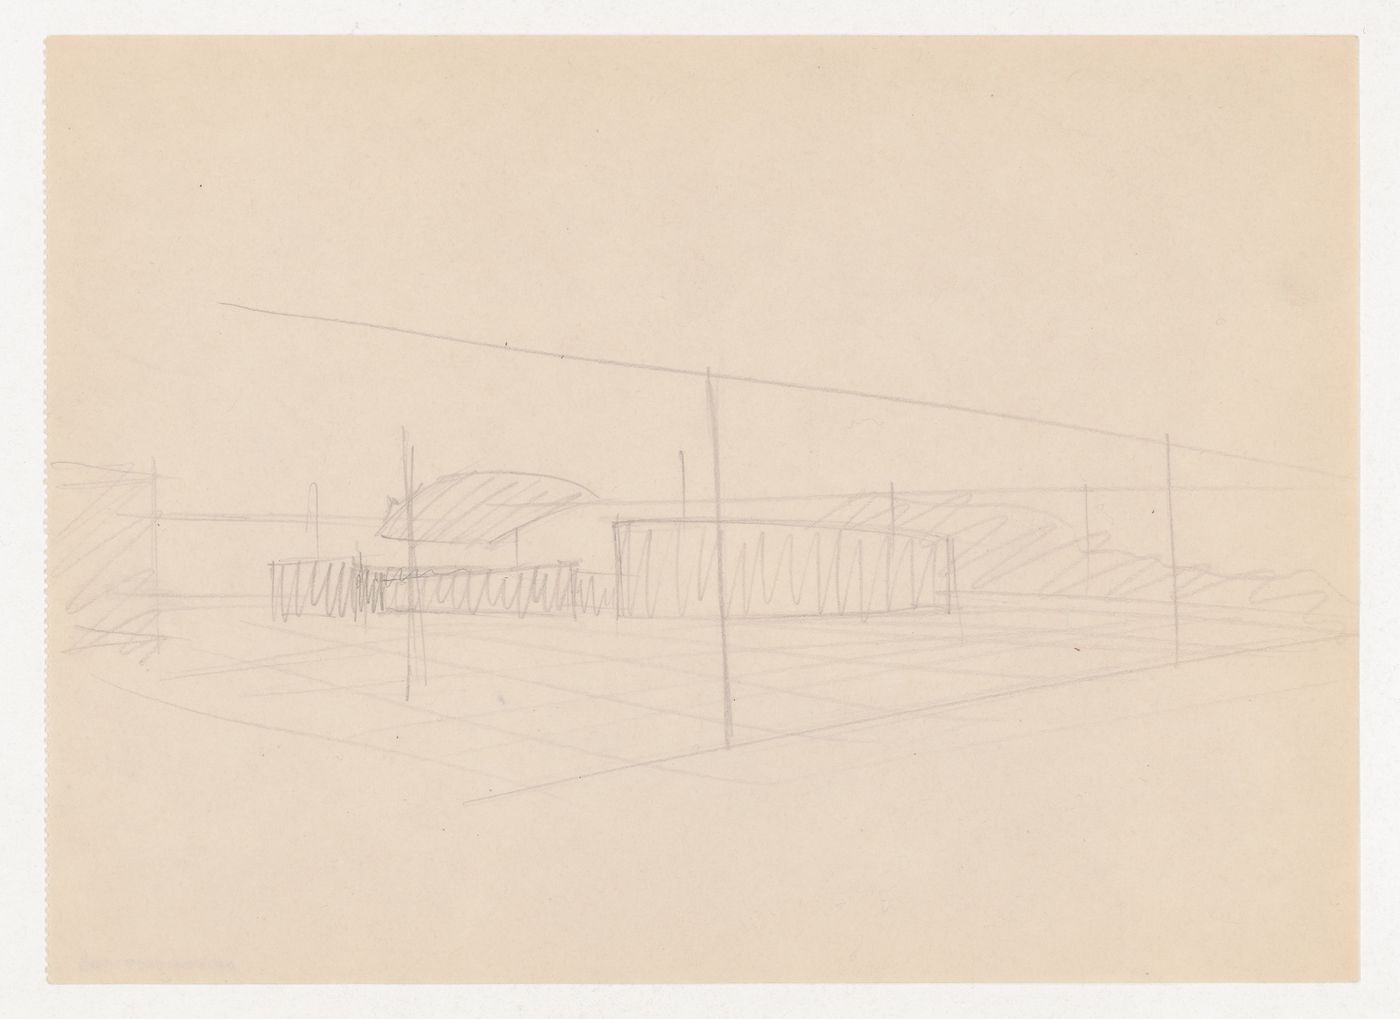 Exterior perspective sketch for Museum for a Small City showing the auditorium with suspended ceiling